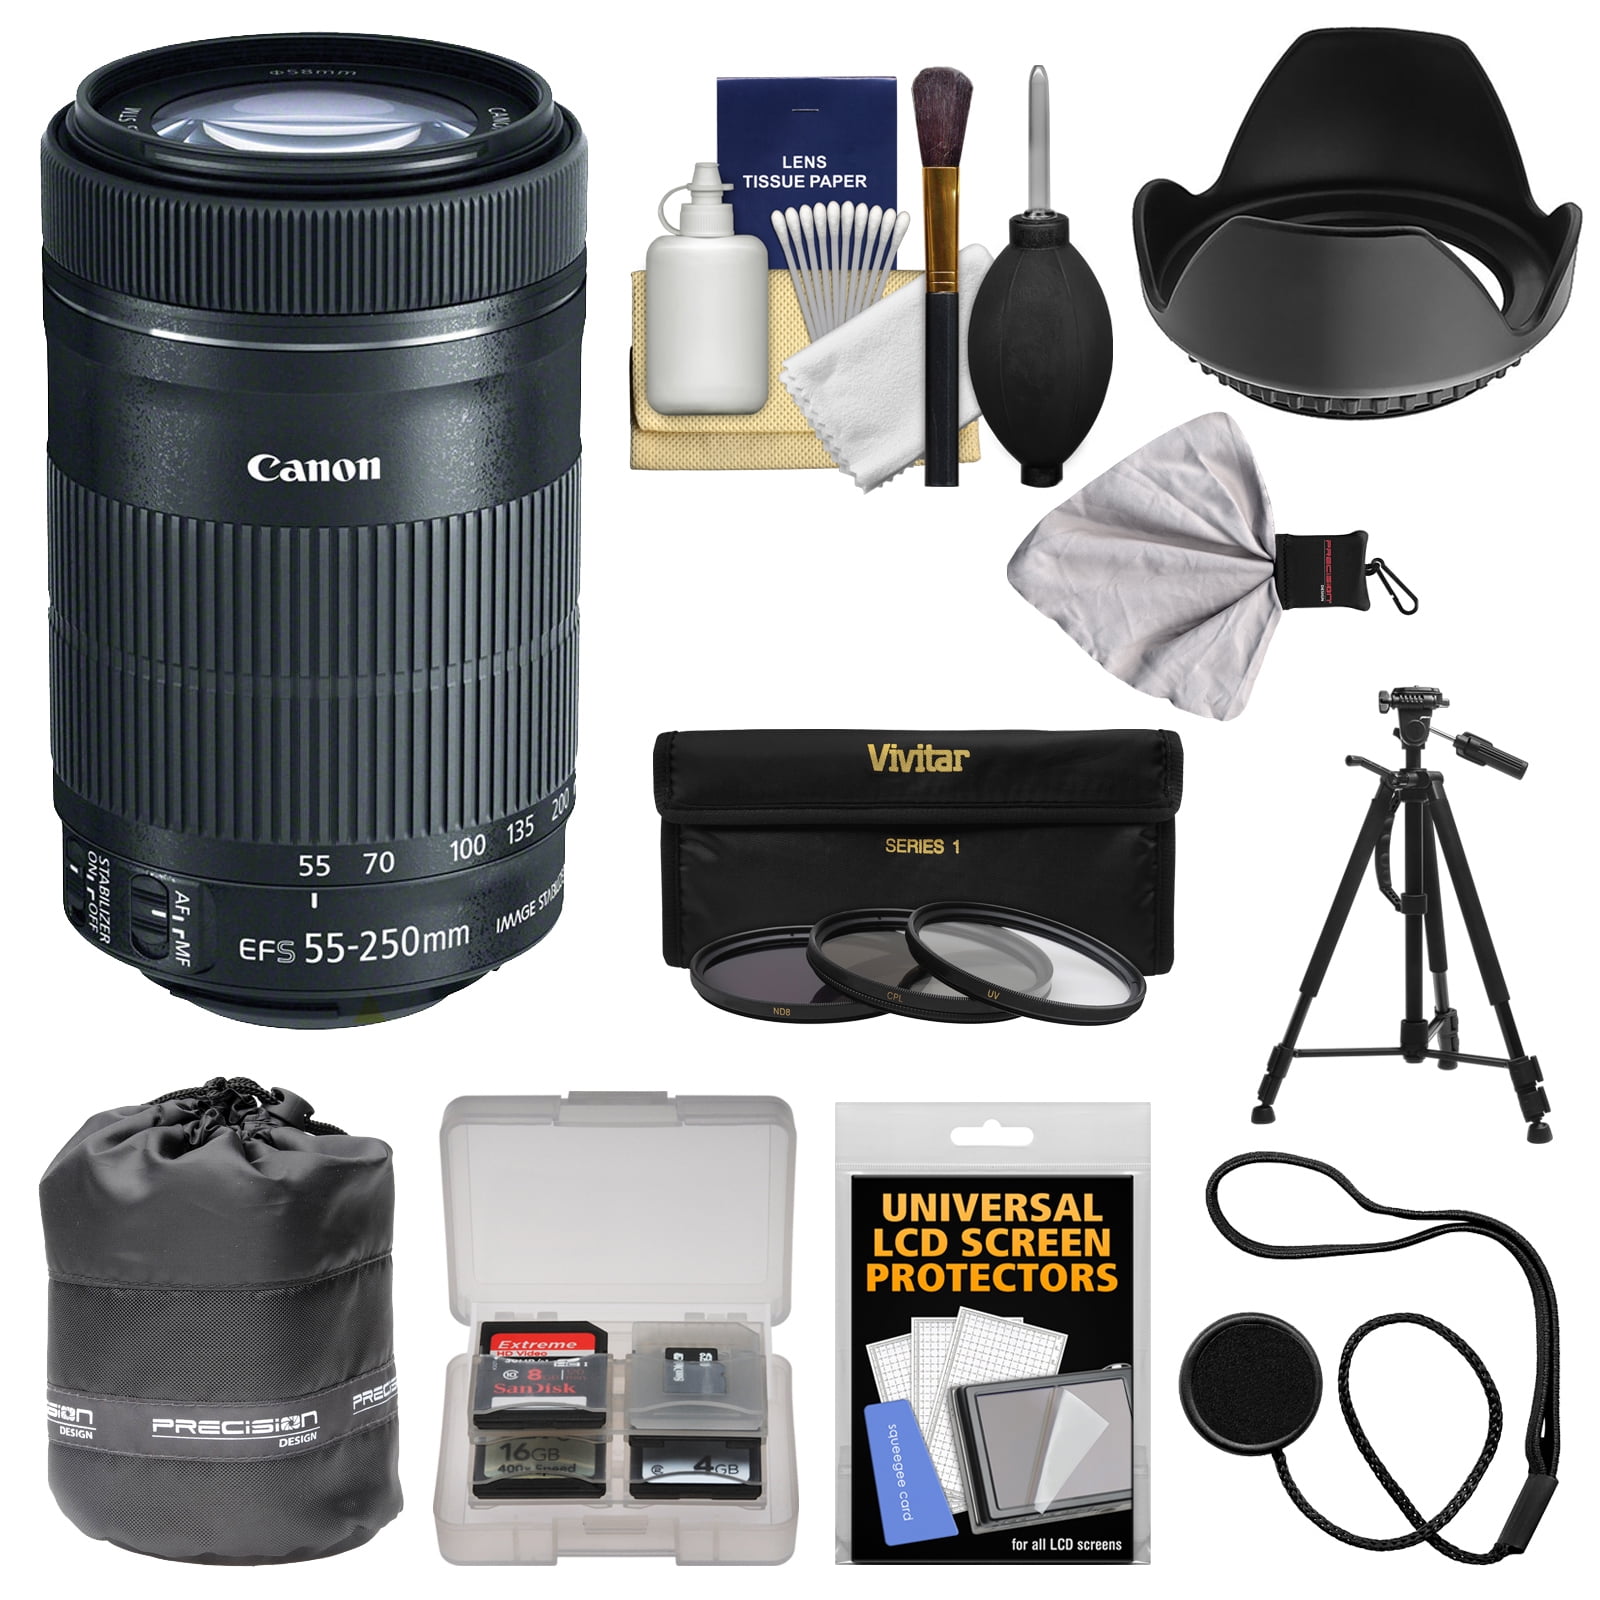 Canon EF-S 55-250mm f/4.0-5.6 IS STM Zoom Lens with Tripod + 3 Filters +  Hood + Kit for EOS 70D, Rebel T3, T3i, T4i, T5, T5i, SL1 DSLR Cameras